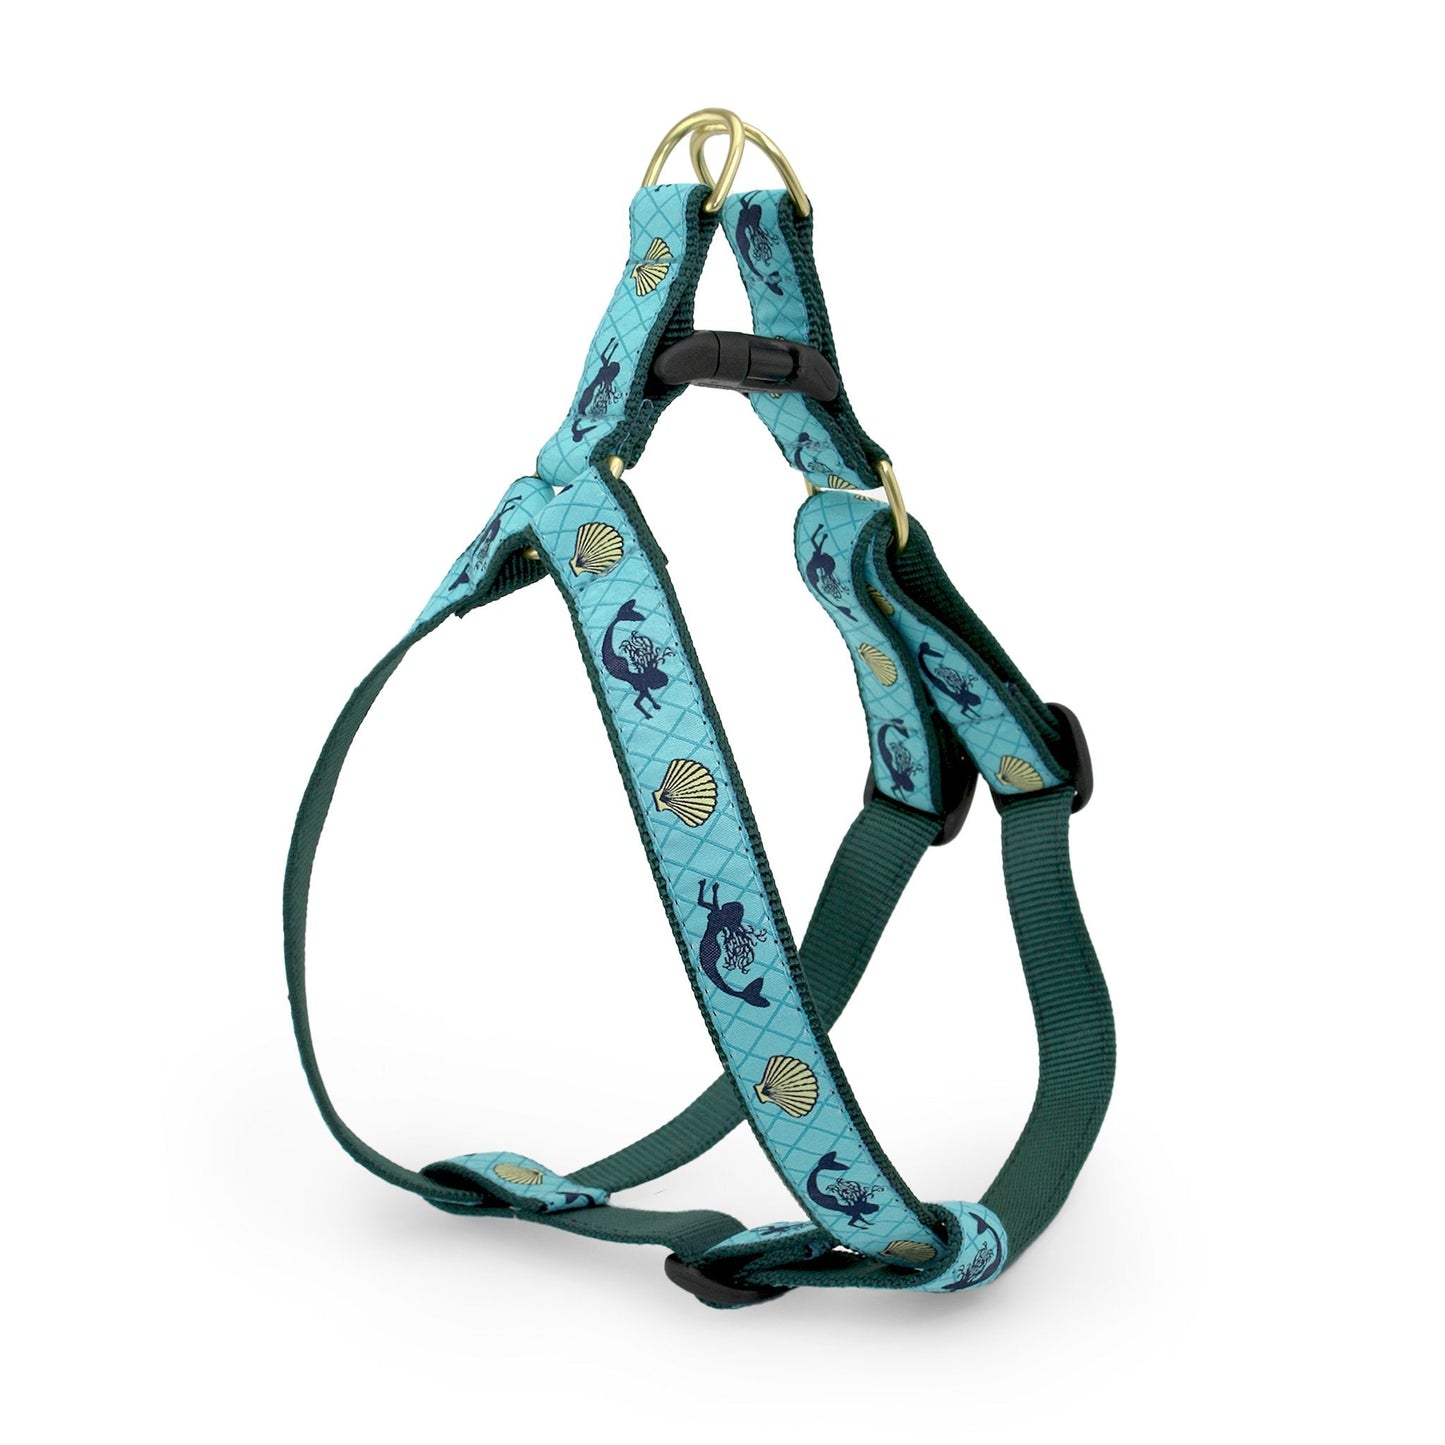 Mermaid Dog Harness by Up Country